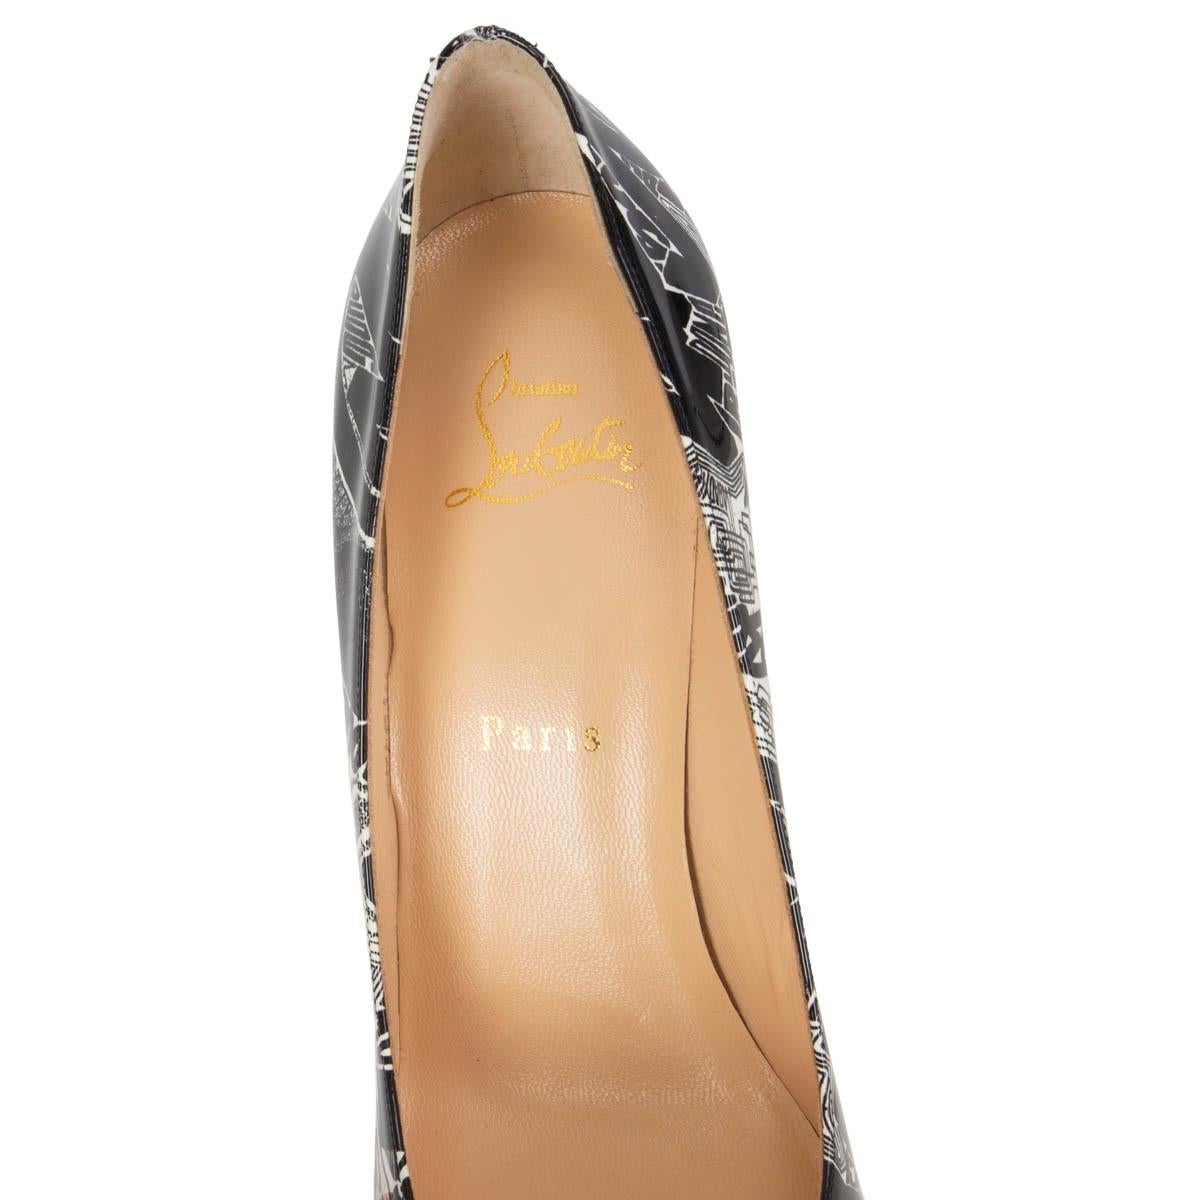 Women's CHRISTIAN LOUBOUTIN black patent leather PIGALLE FOLLIES NICOGRAF Pumps Shoes 39 For Sale